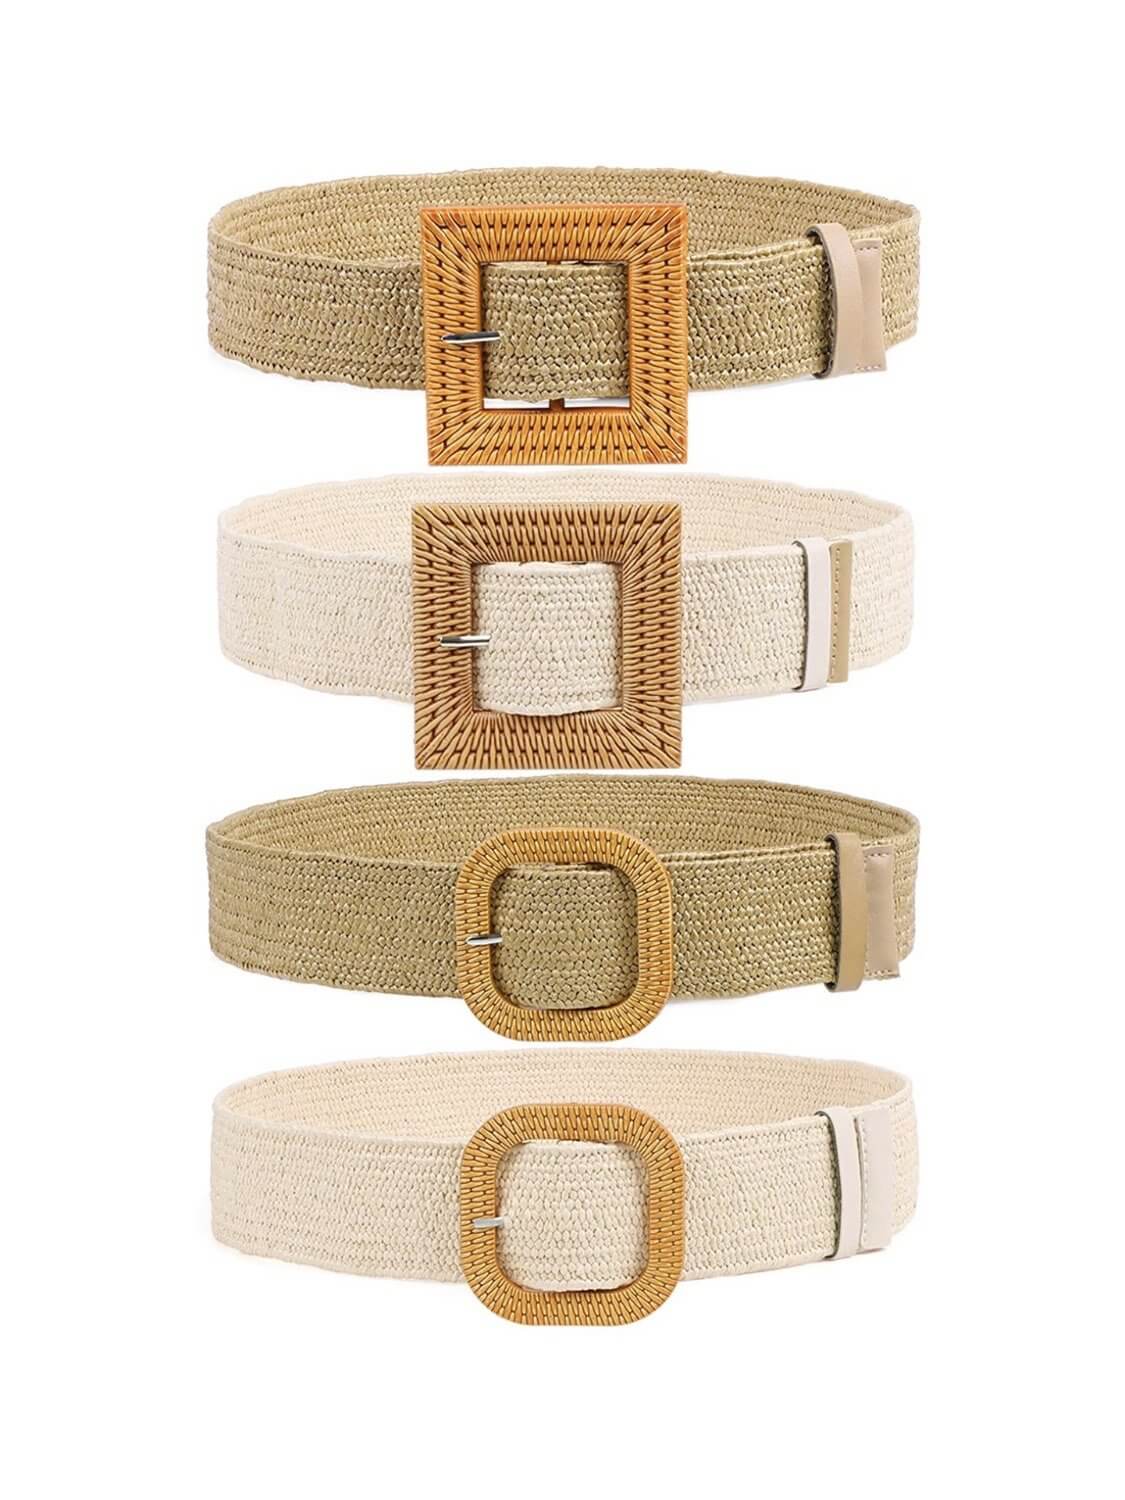 boho belts in colors and models Square Camel, Square Beige, Round Camel and Round Beige